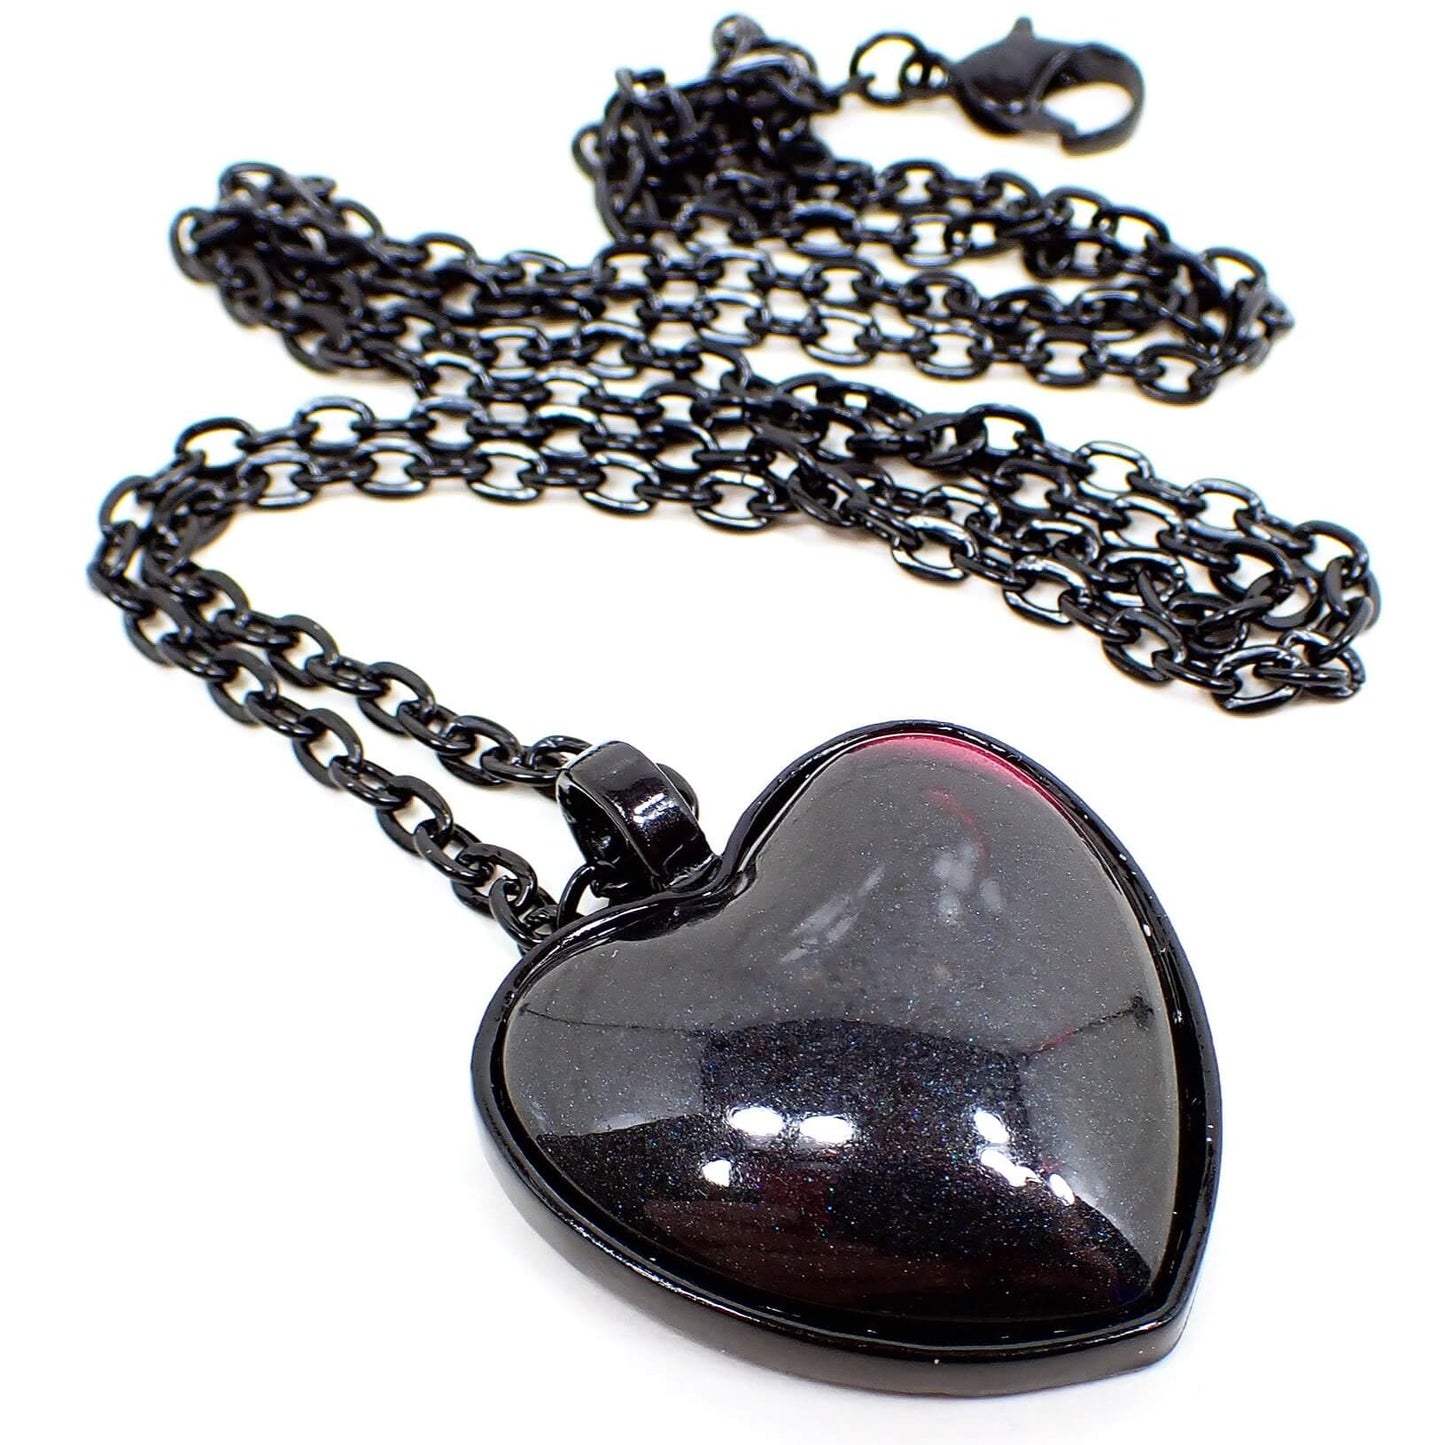 Goth Black Heart Handmade Resin Pendant Necklace with a Touch of Bright Pink